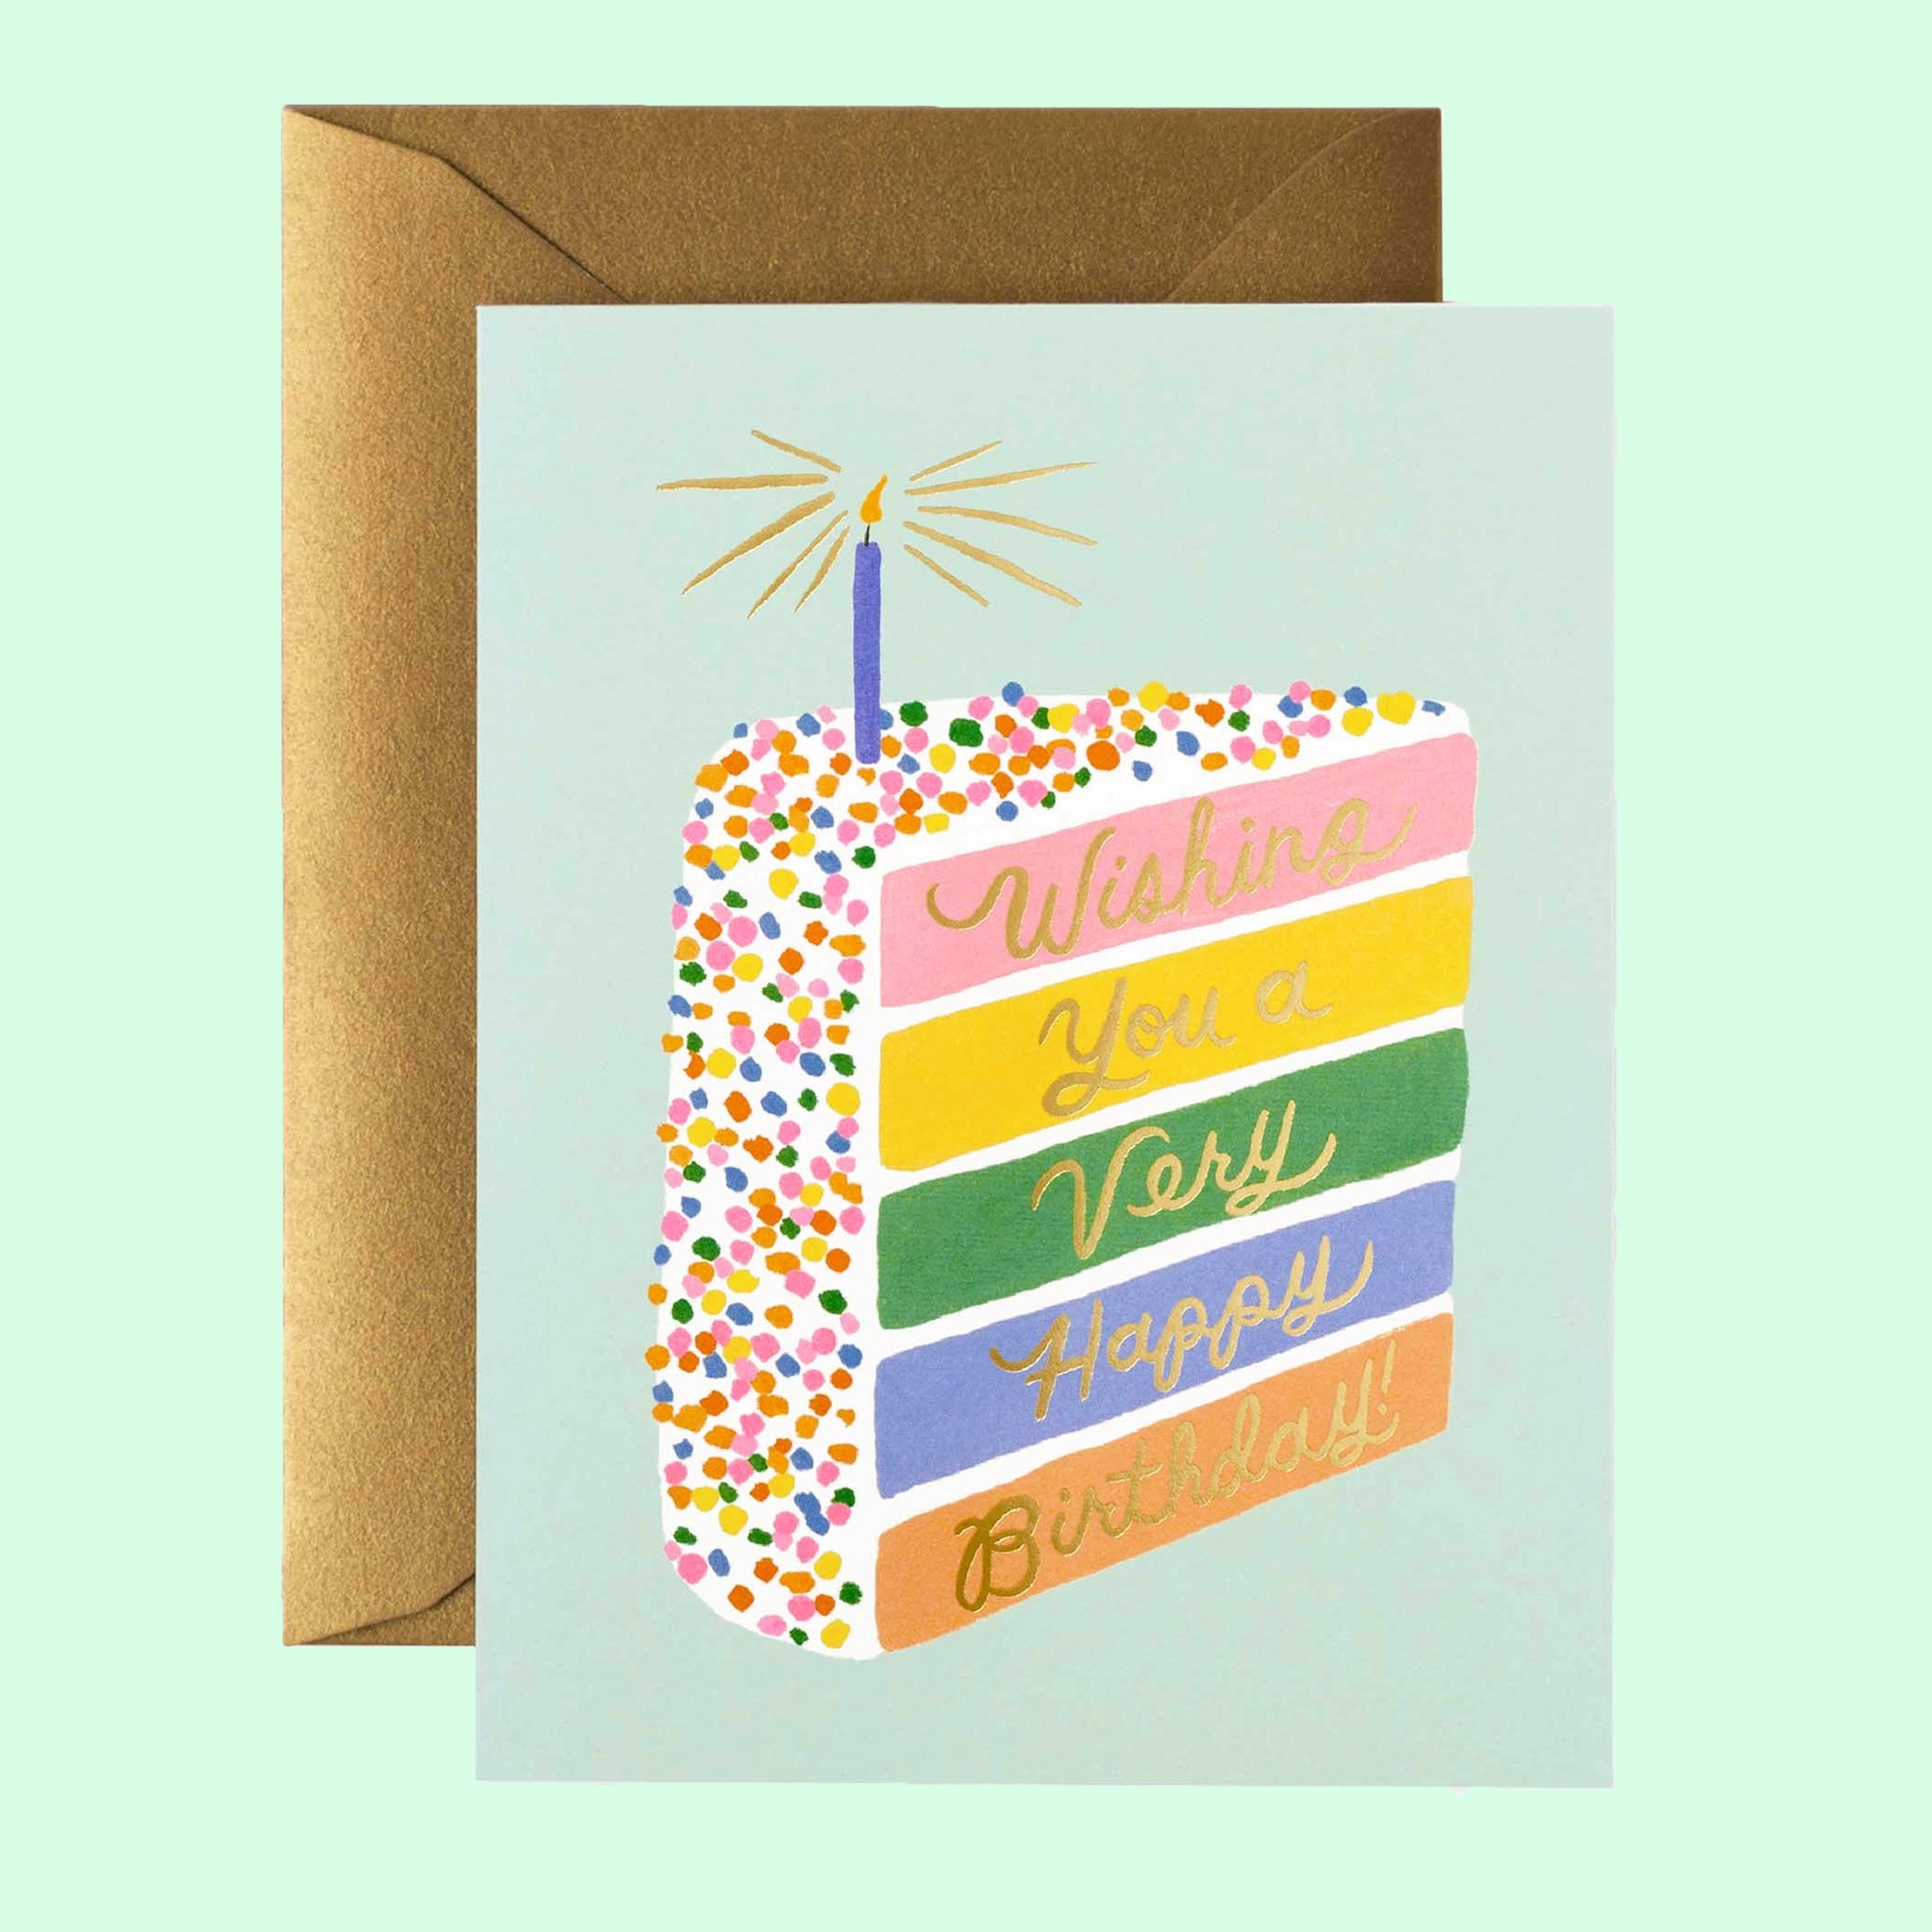 On a light green background is a super light mint card with a multicolored pastel birthday cake slice graphic with multicolored sprinkles on the edge, a sparkling candle and different colors in each layer with words that read, "Wishing You a Very Happy Birthday" in gold letters.